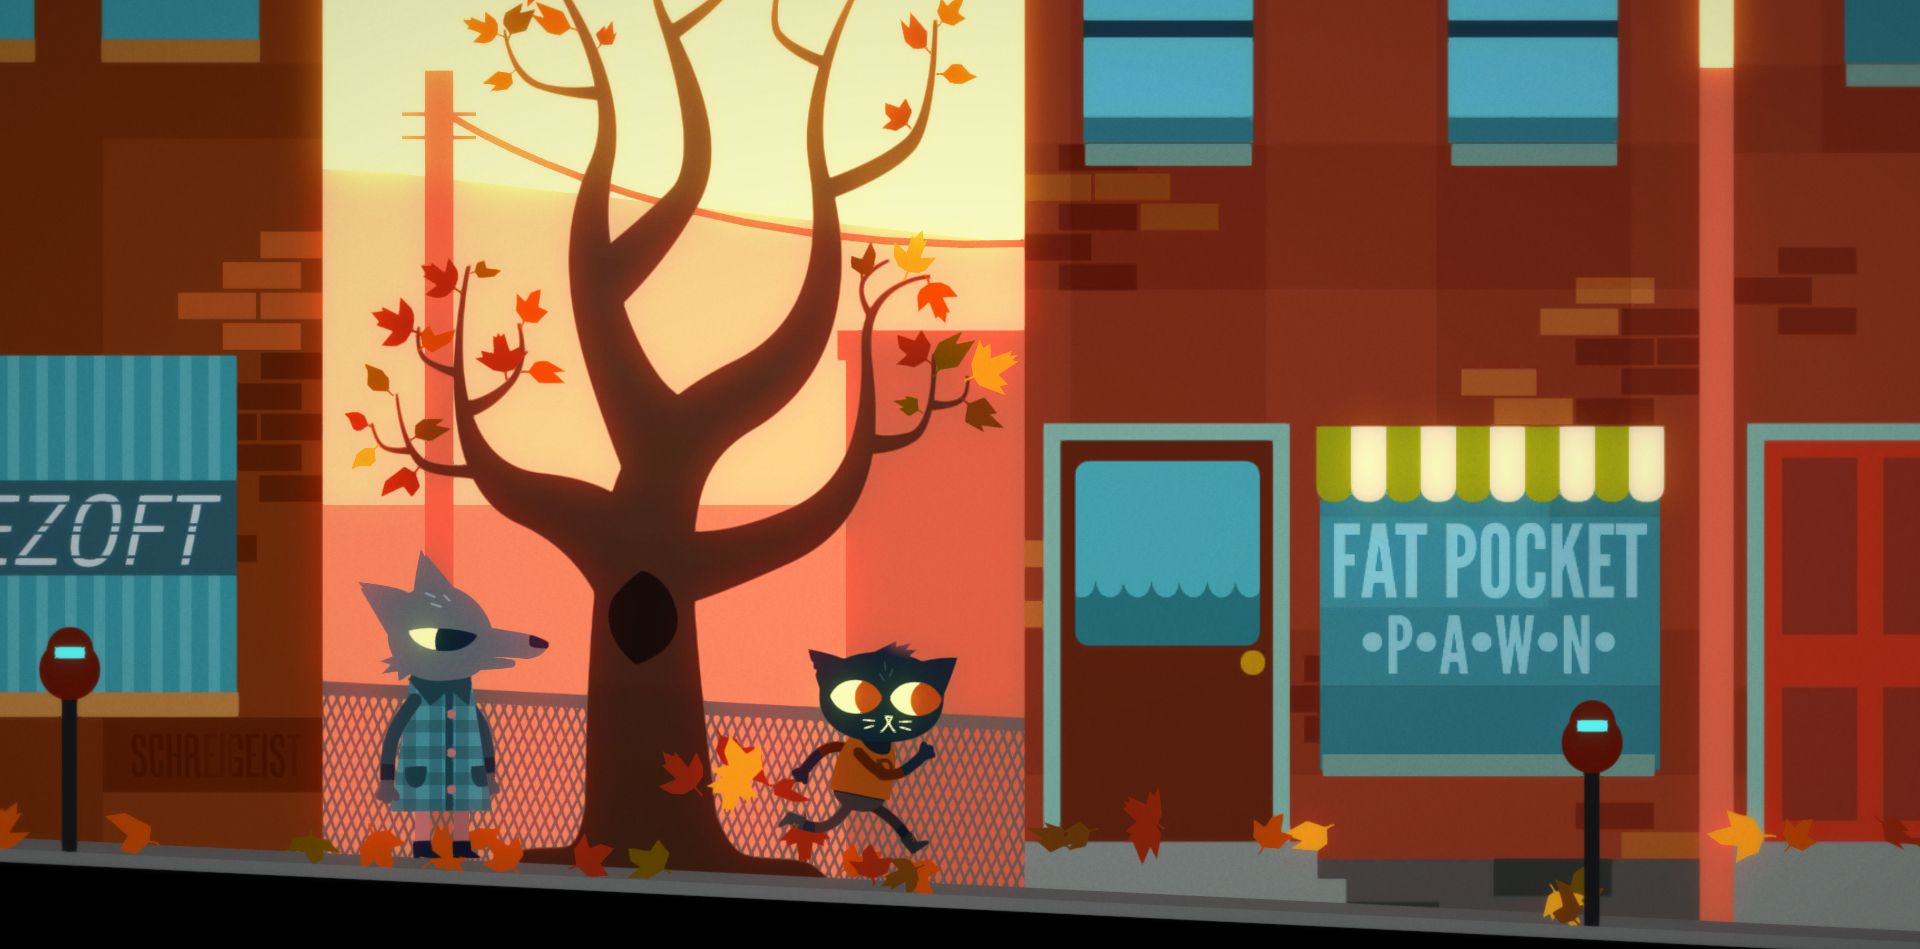 Mae runs down a city street as a fox watches in the Switch game A Night in the Woods.